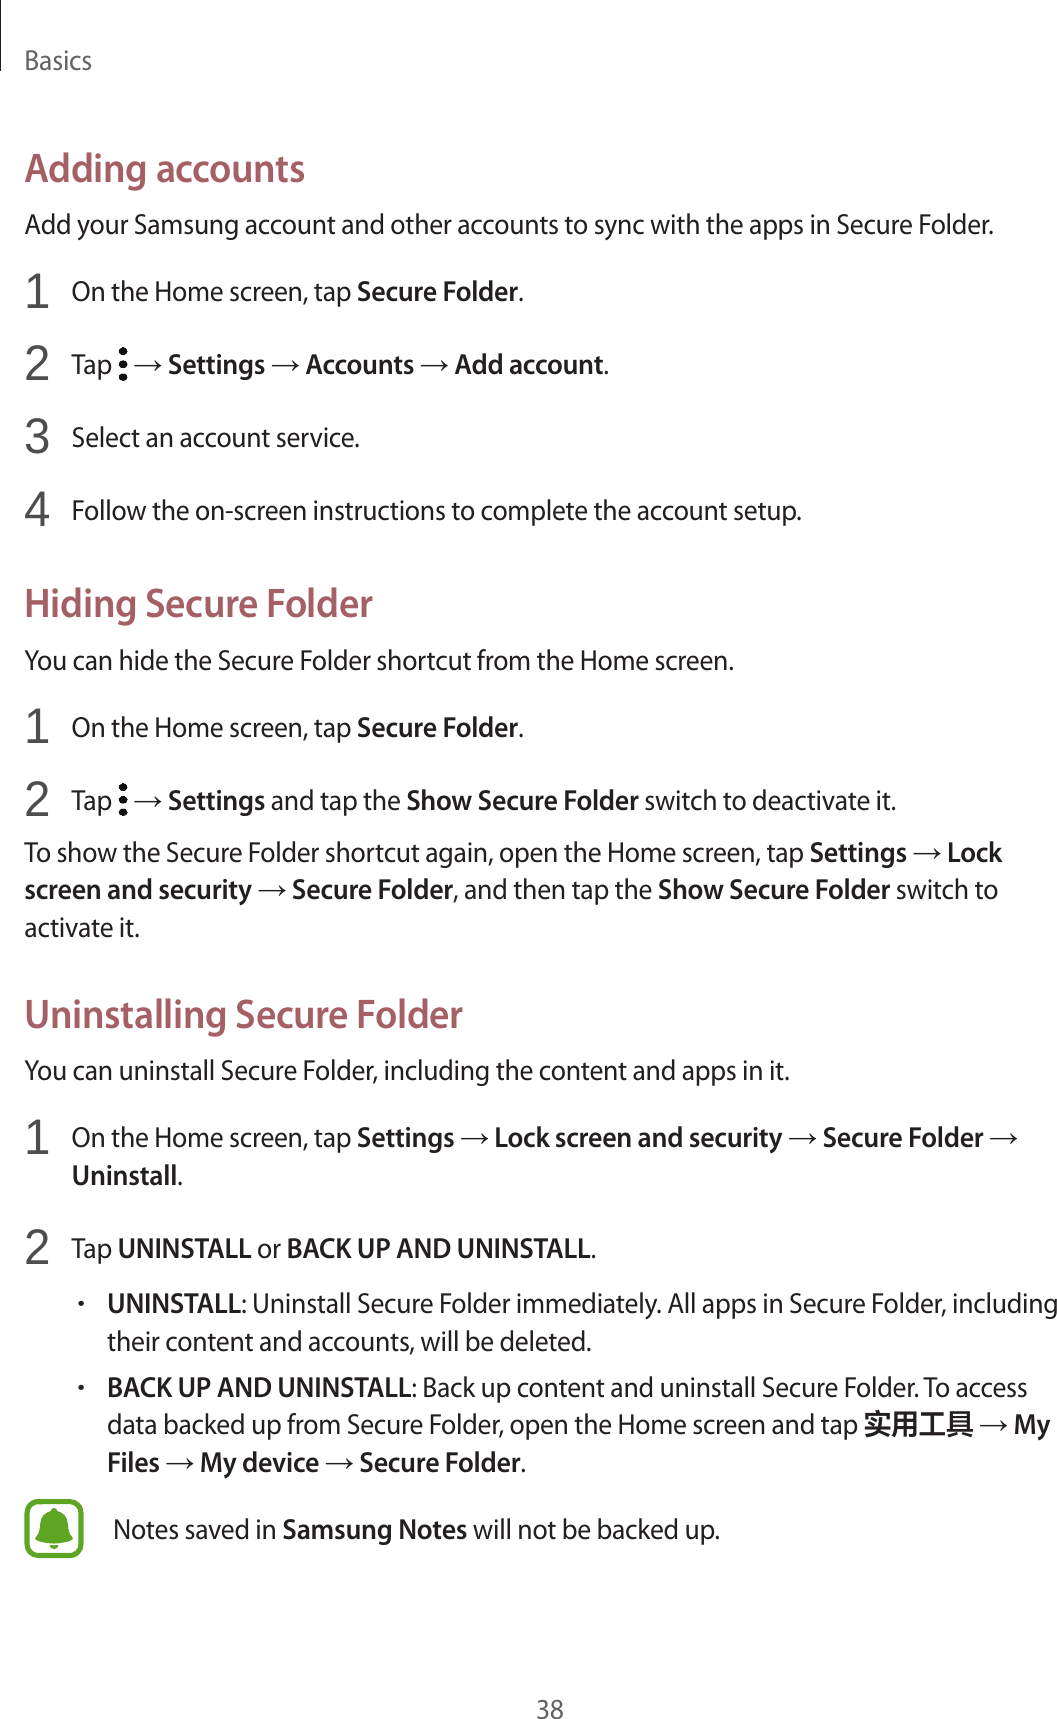 Basics38Adding accountsAdd your Samsung account and other accounts to sync with the apps in Secure Folder.1  On the Home screen, tap Secure Folder.2  Tap   → Settings → Accounts → Add account.3  Select an account service.4  Follow the on-screen instructions to complete the account setup.Hiding Secure FolderYou can hide the Secure Folder shortcut from the Home screen.1  On the Home screen, tap Secure Folder.2  Tap   → Settings and tap the Show Secure Folder switch to deactivate it.To show the Secure Folder shortcut again, open the Home screen, tap Settings → Lock screen and security → Secure Folder, and then tap the Show Secure Folder switch to activate it.Uninstalling Secure FolderYou can uninstall Secure Folder, including the content and apps in it.1  On the Home screen, tap Settings → Lock screen and security → Secure Folder → Uninstall.2  Tap UNINSTALL or BACK UP AND UNINSTALL.•UNINSTALL: Uninstall Secure Folder immediately. All apps in Secure Folder, including their content and accounts, will be deleted.•BACK UP AND UNINSTALL: Back up content and uninstall Secure Folder. To access data backed up from Secure Folder, open the Home screen and tap 实用工具 → My Files → My device → Secure Folder.Notes saved in Samsung Notes will not be backed up.